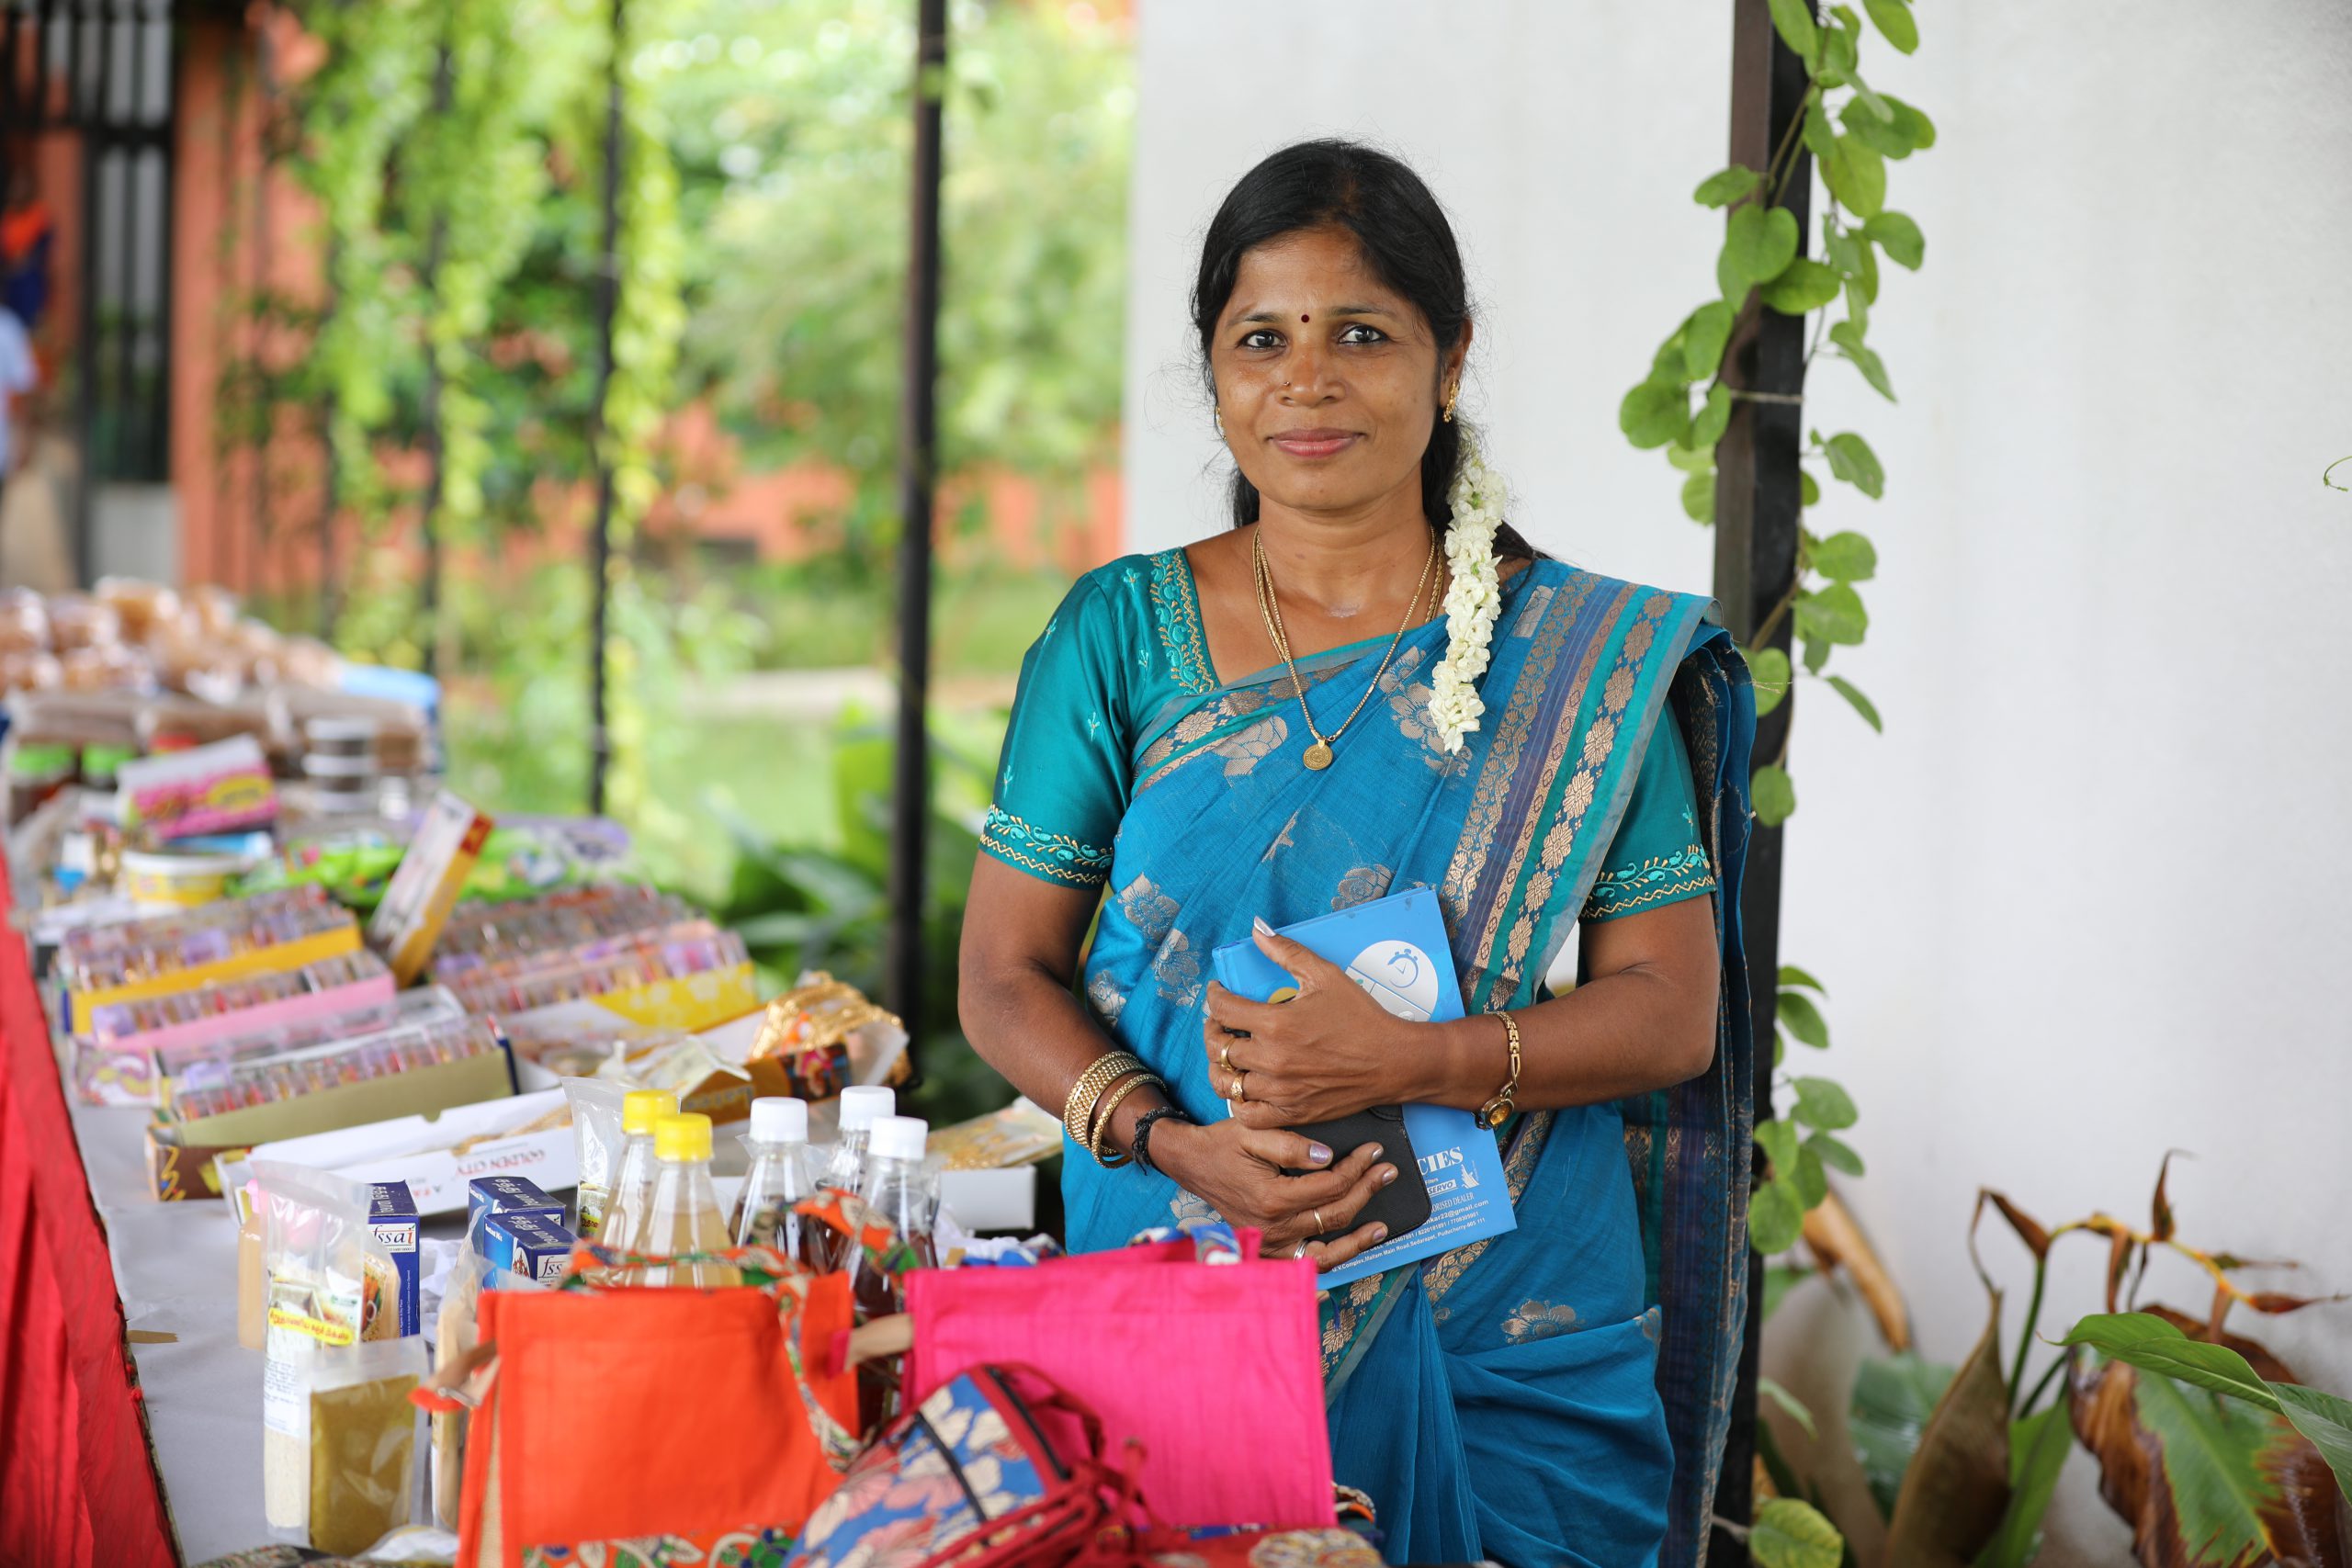 Adapting to the Post-Covid world - Six women entrepreneurs from rural India  show the way - HAND IN HAND INDIA